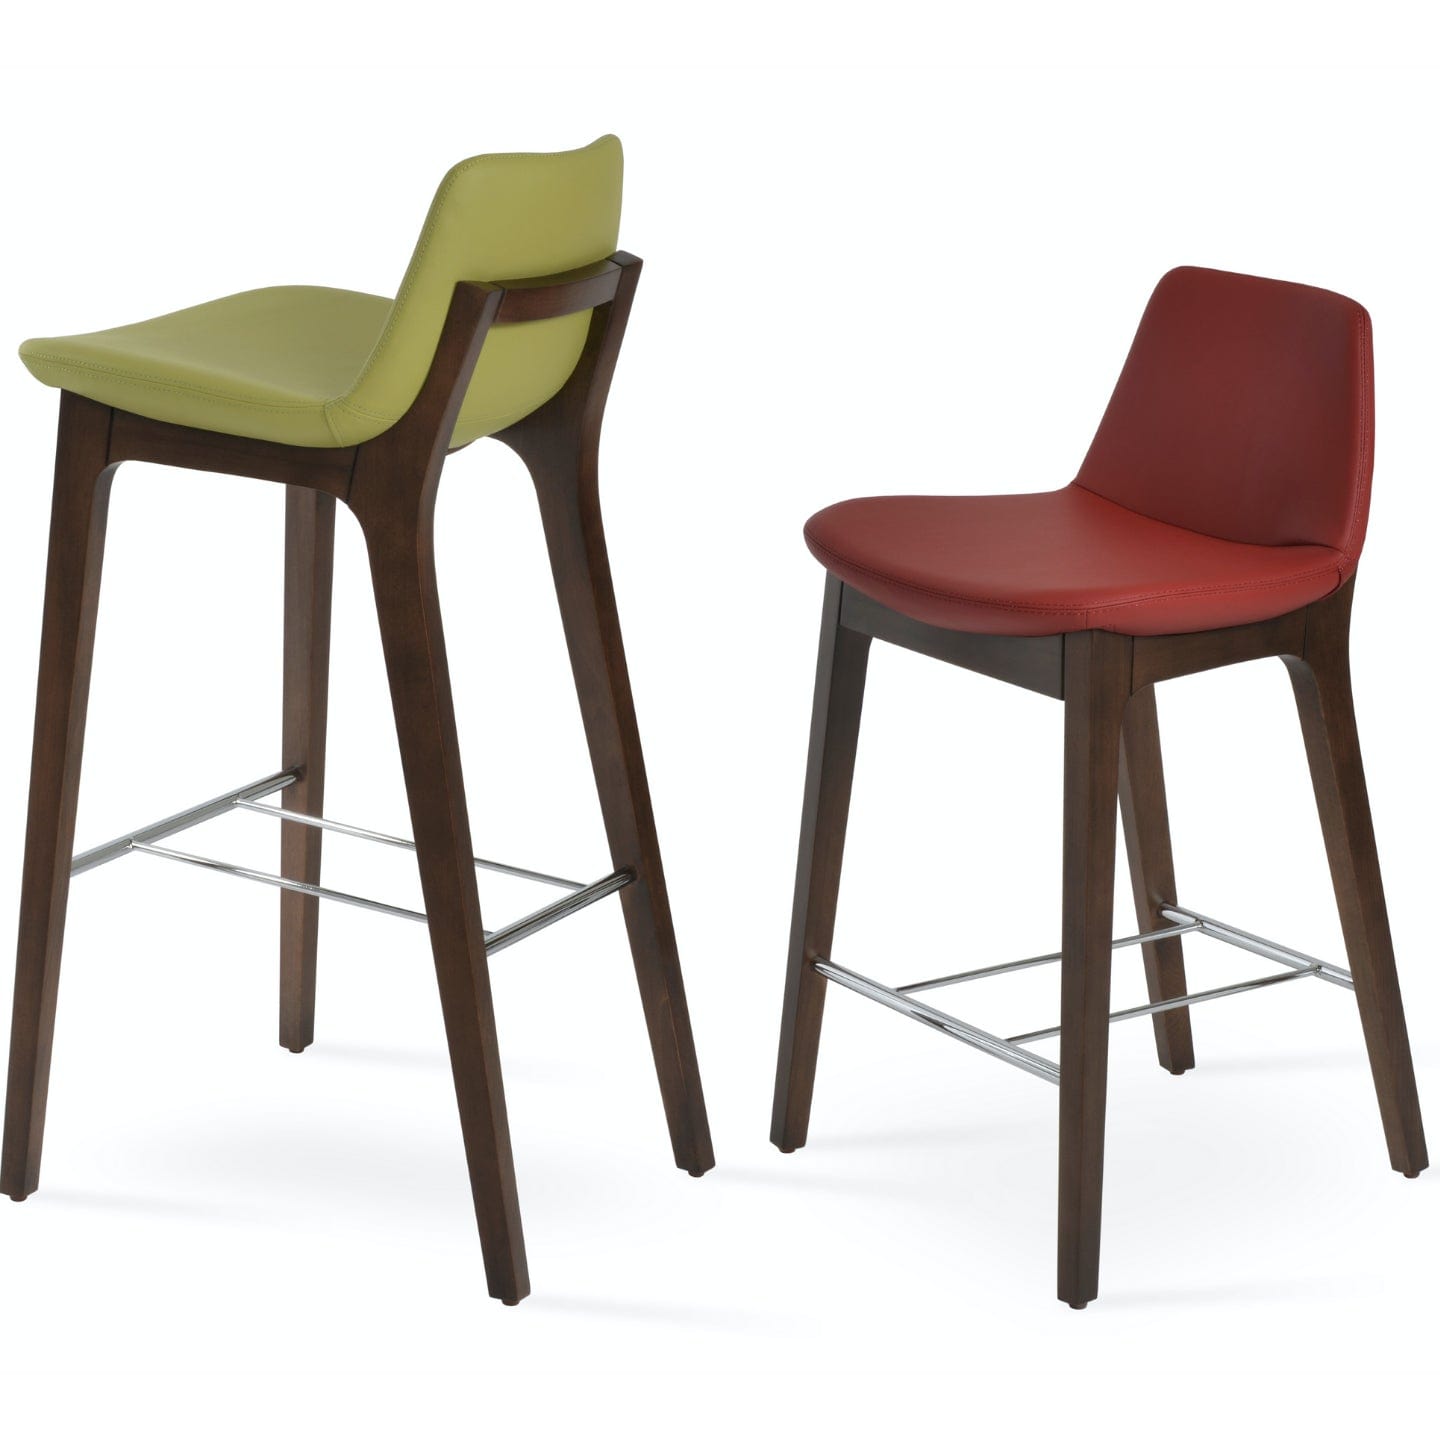 Soho Concept pera-wood-handle-back-wood-base-faux-leather-seat-kitchen-counter-stool-in-dark-red